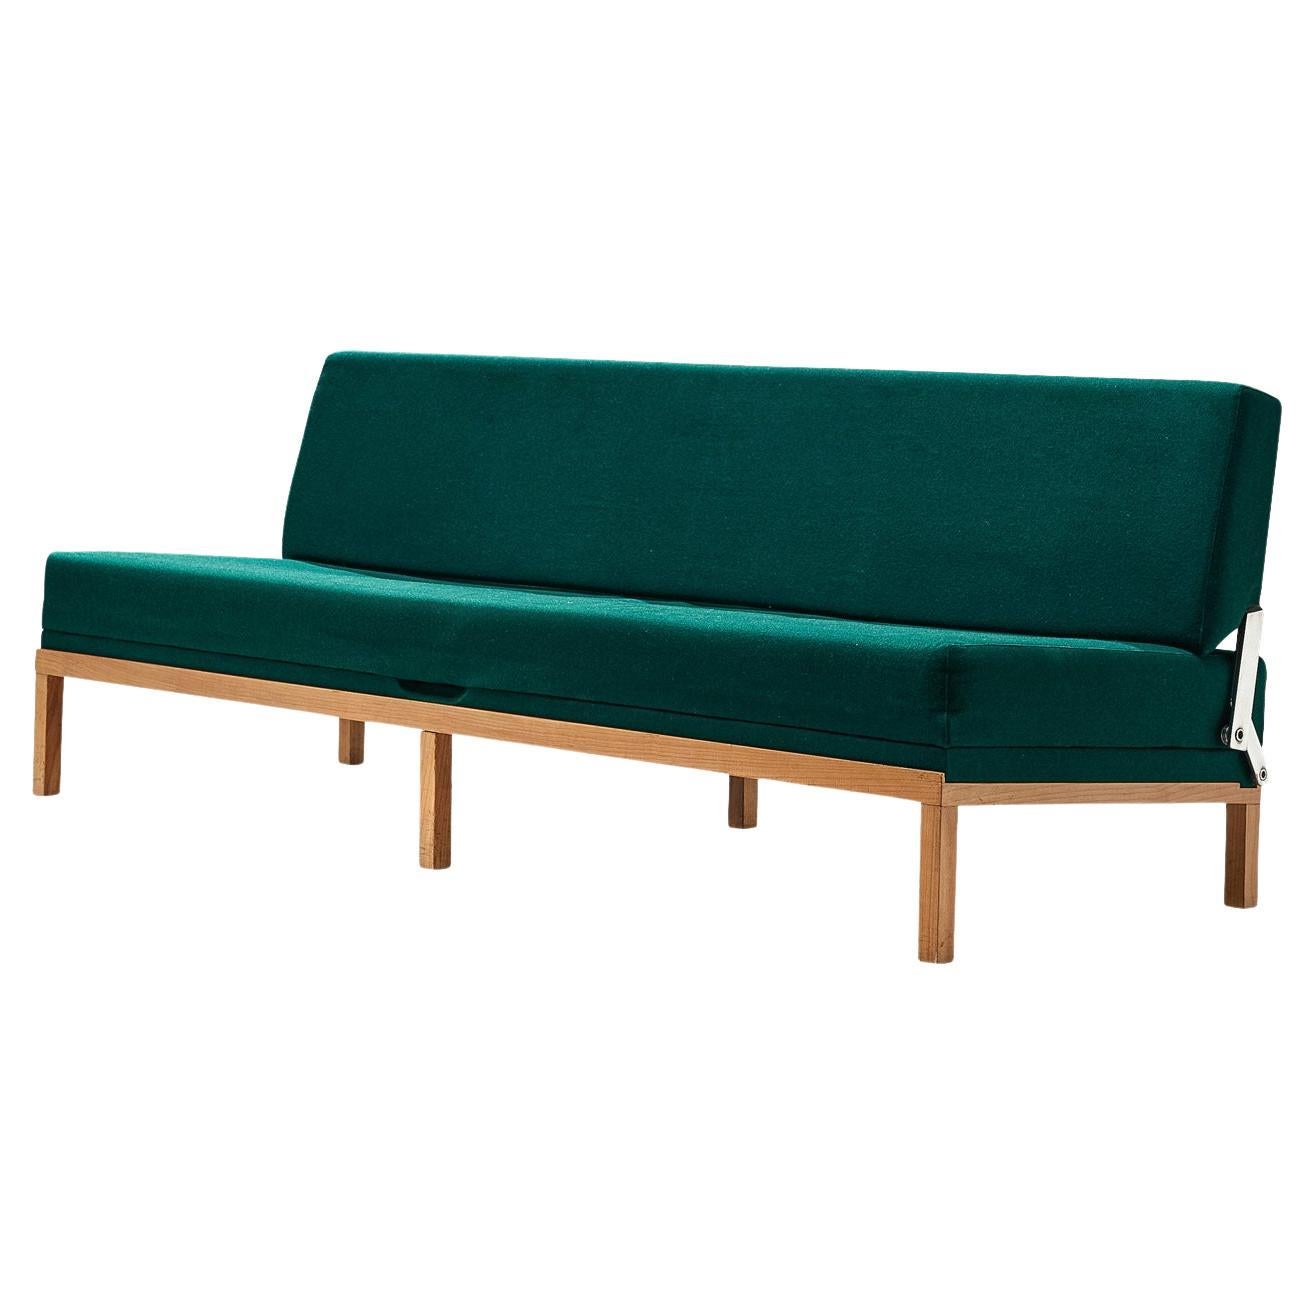 Johannes Spalt 'Constanze' Daybed in Green Upholstery  For Sale